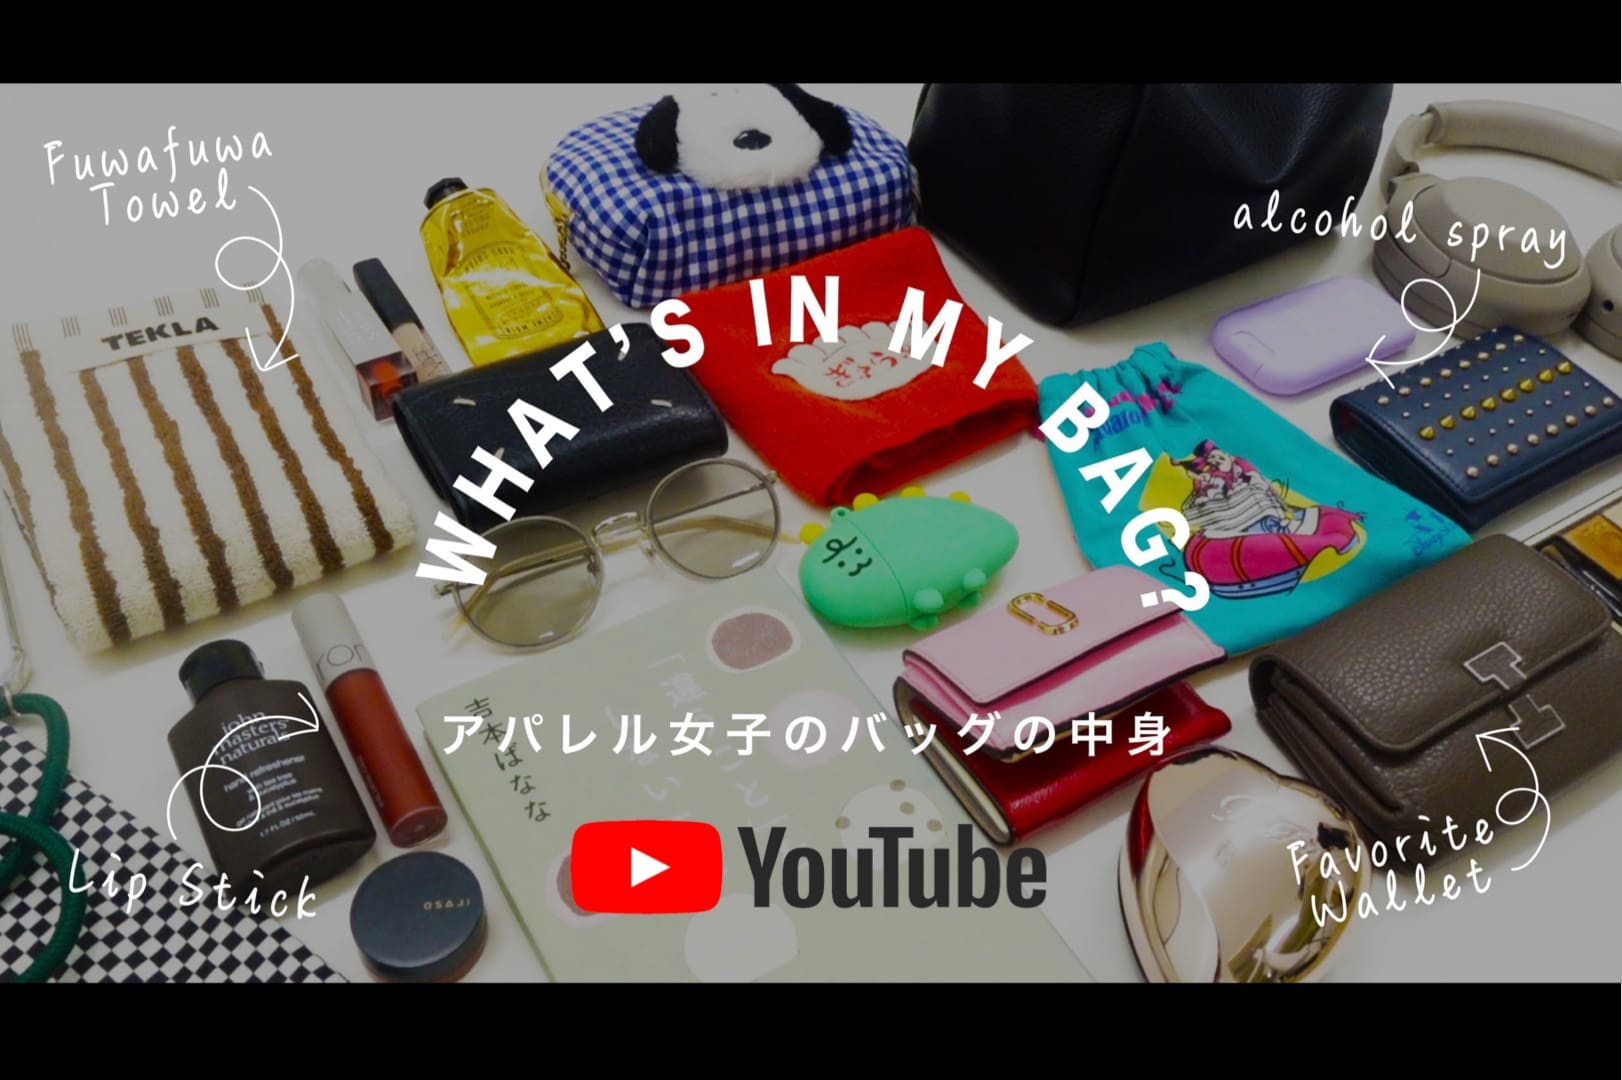 Discoat 【DISCOAT channel】WHAT‘S IN MY BAG？アパレル女子のバッグの中身